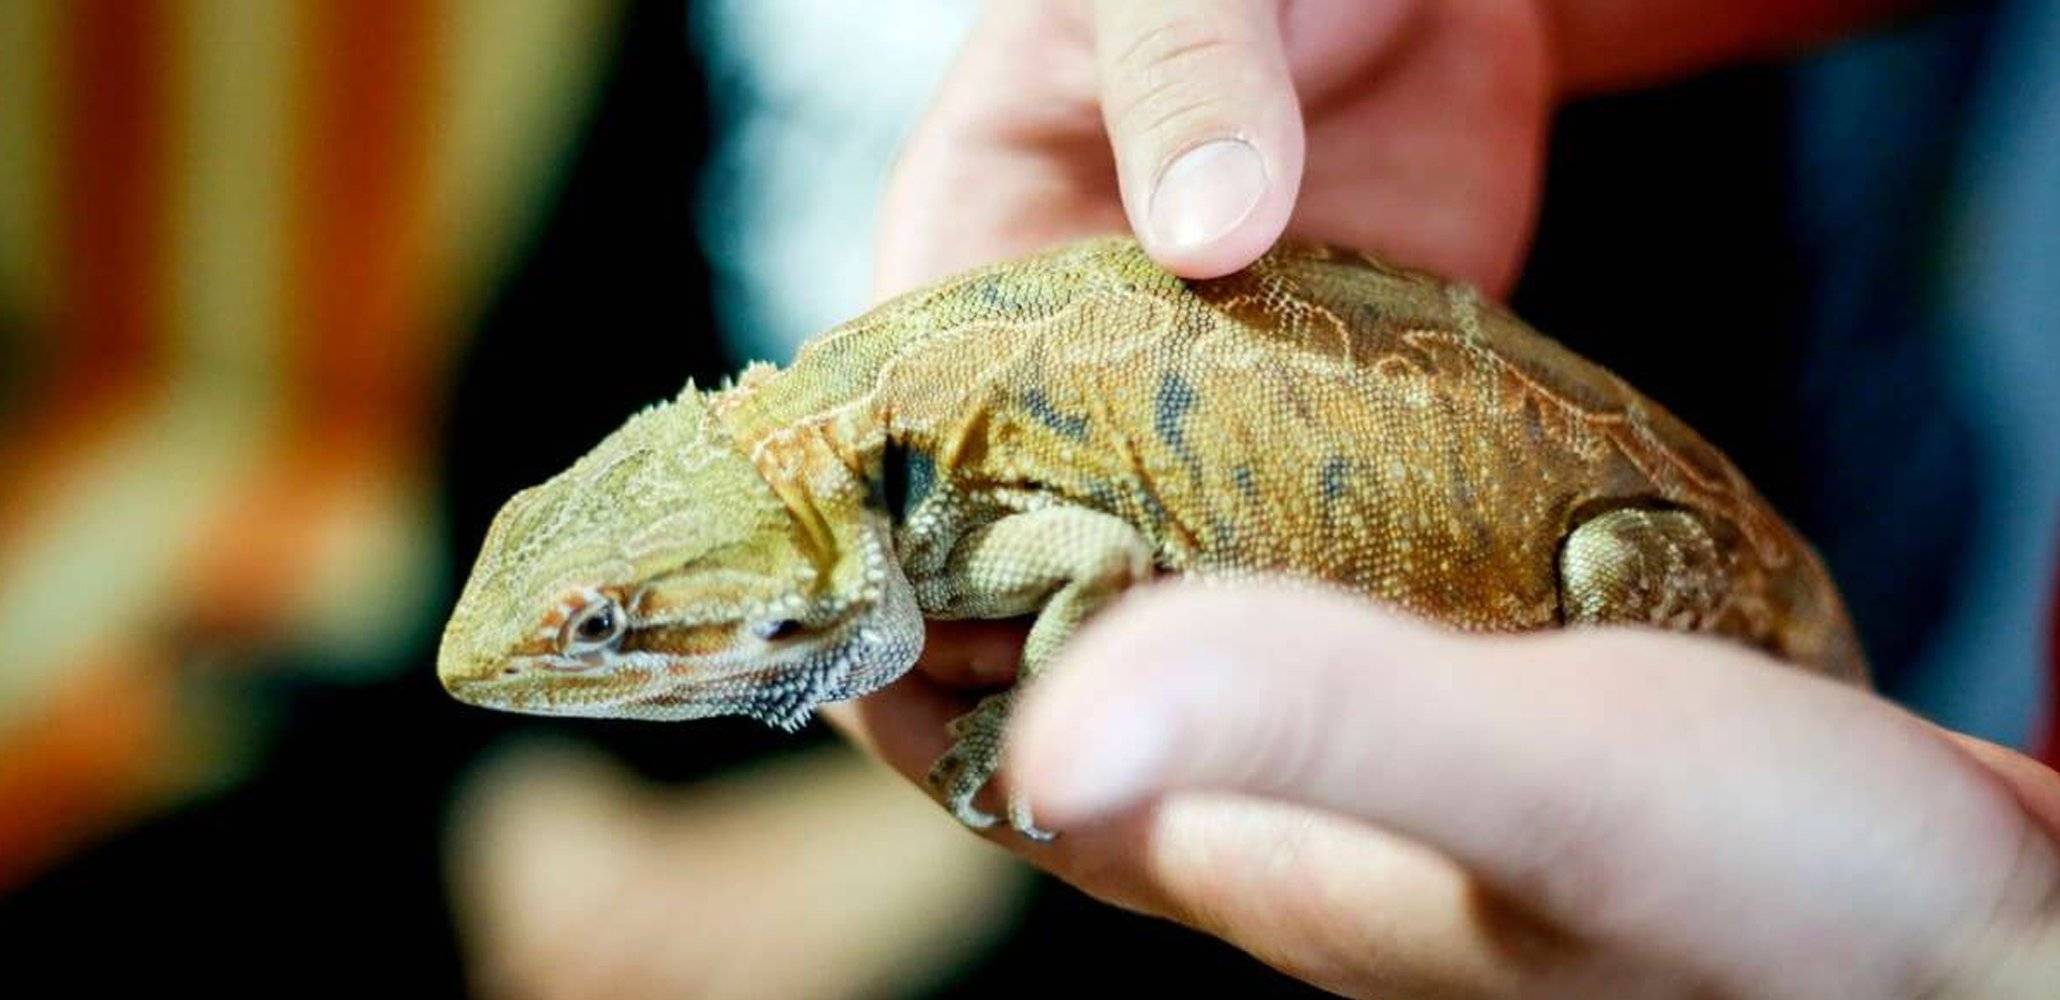 Safely handling reptiles